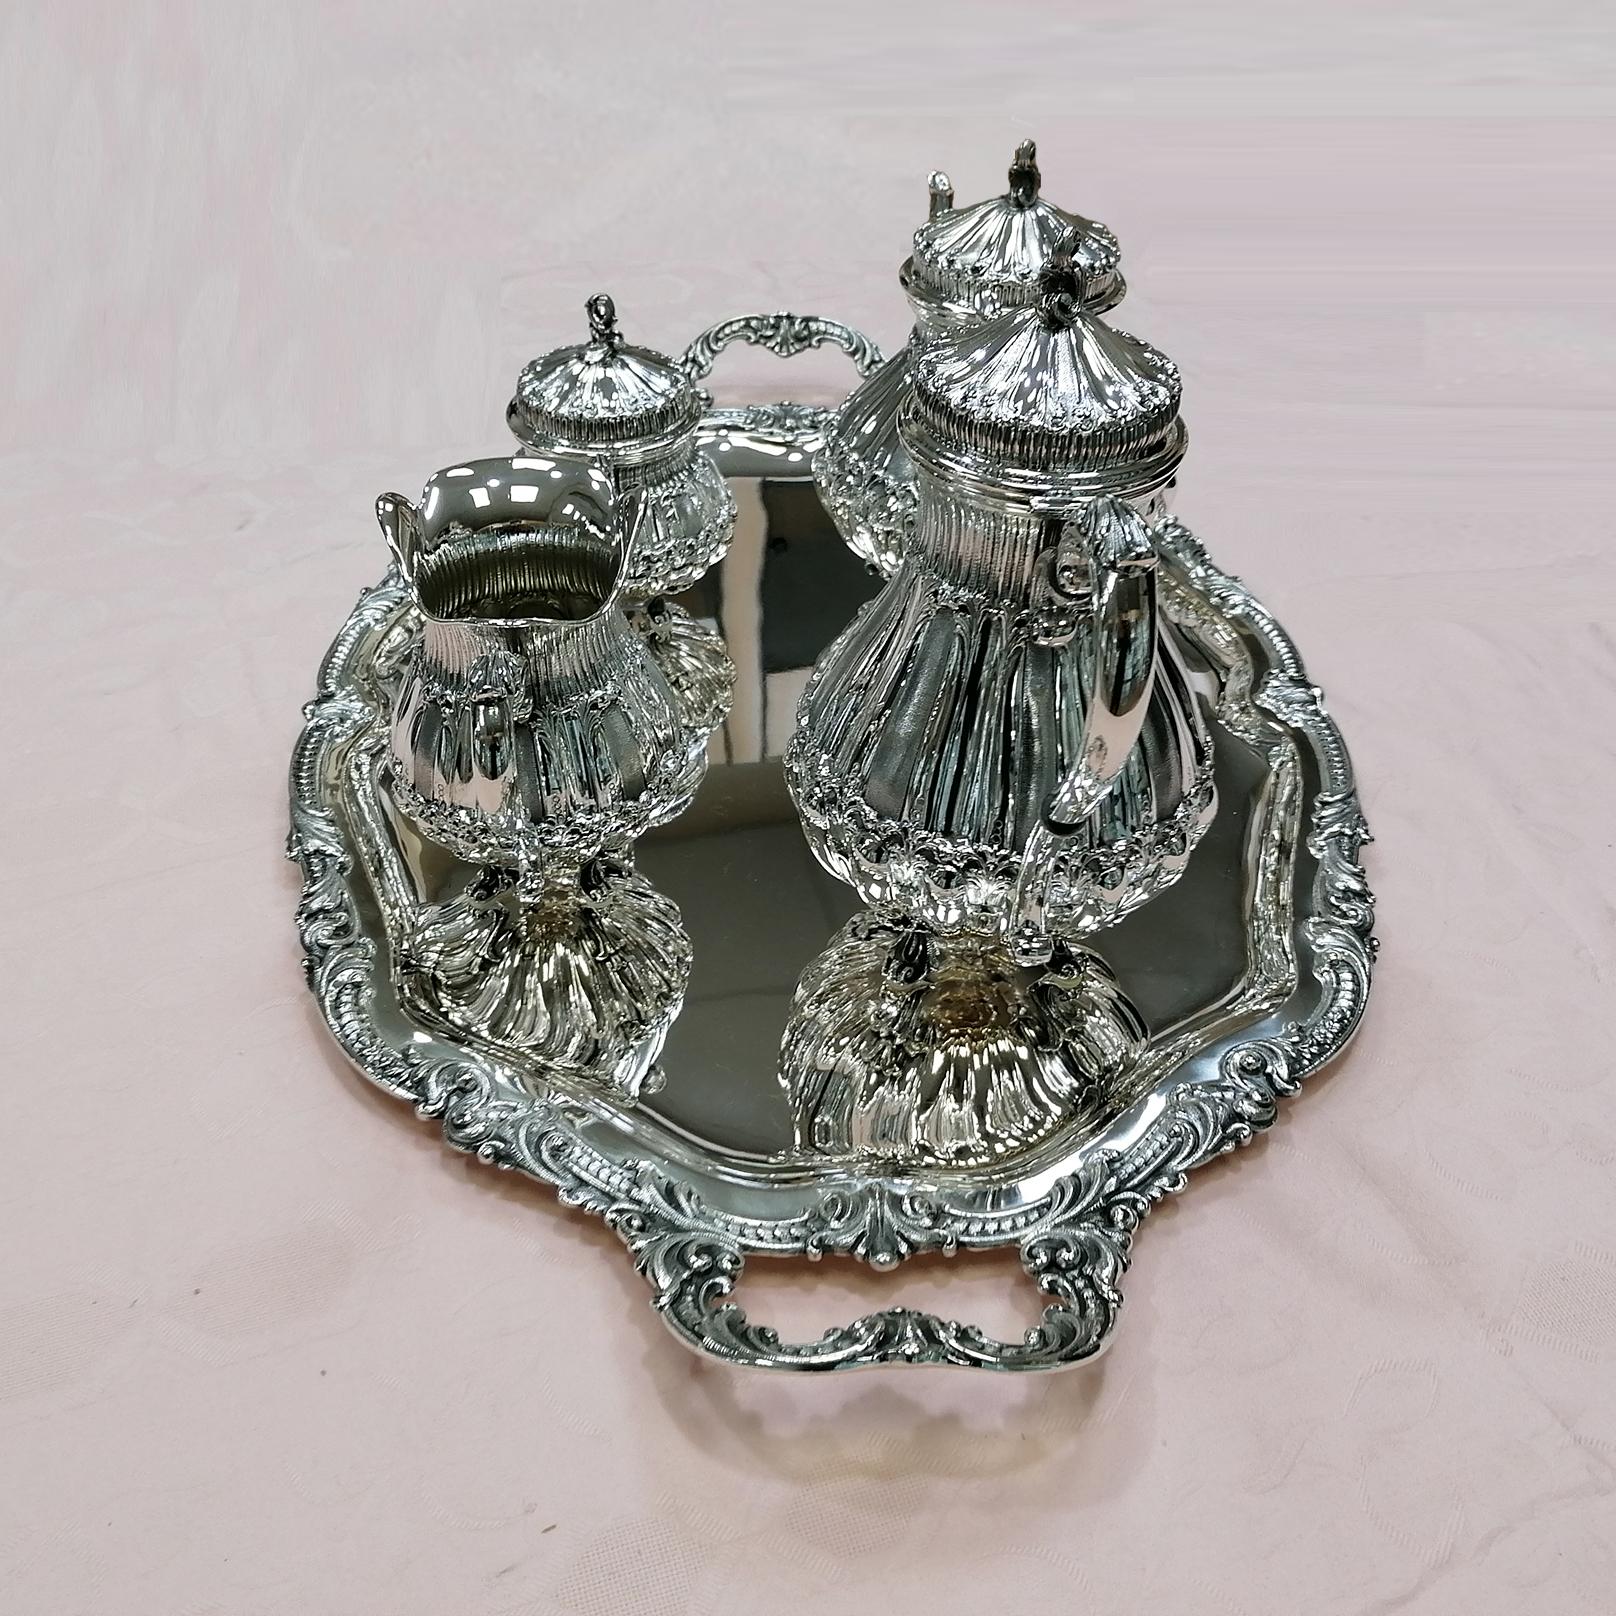 Baroque Revival 20th Century Italian Solid 800 Silver Tea-Coffeeset with Tray For Sale